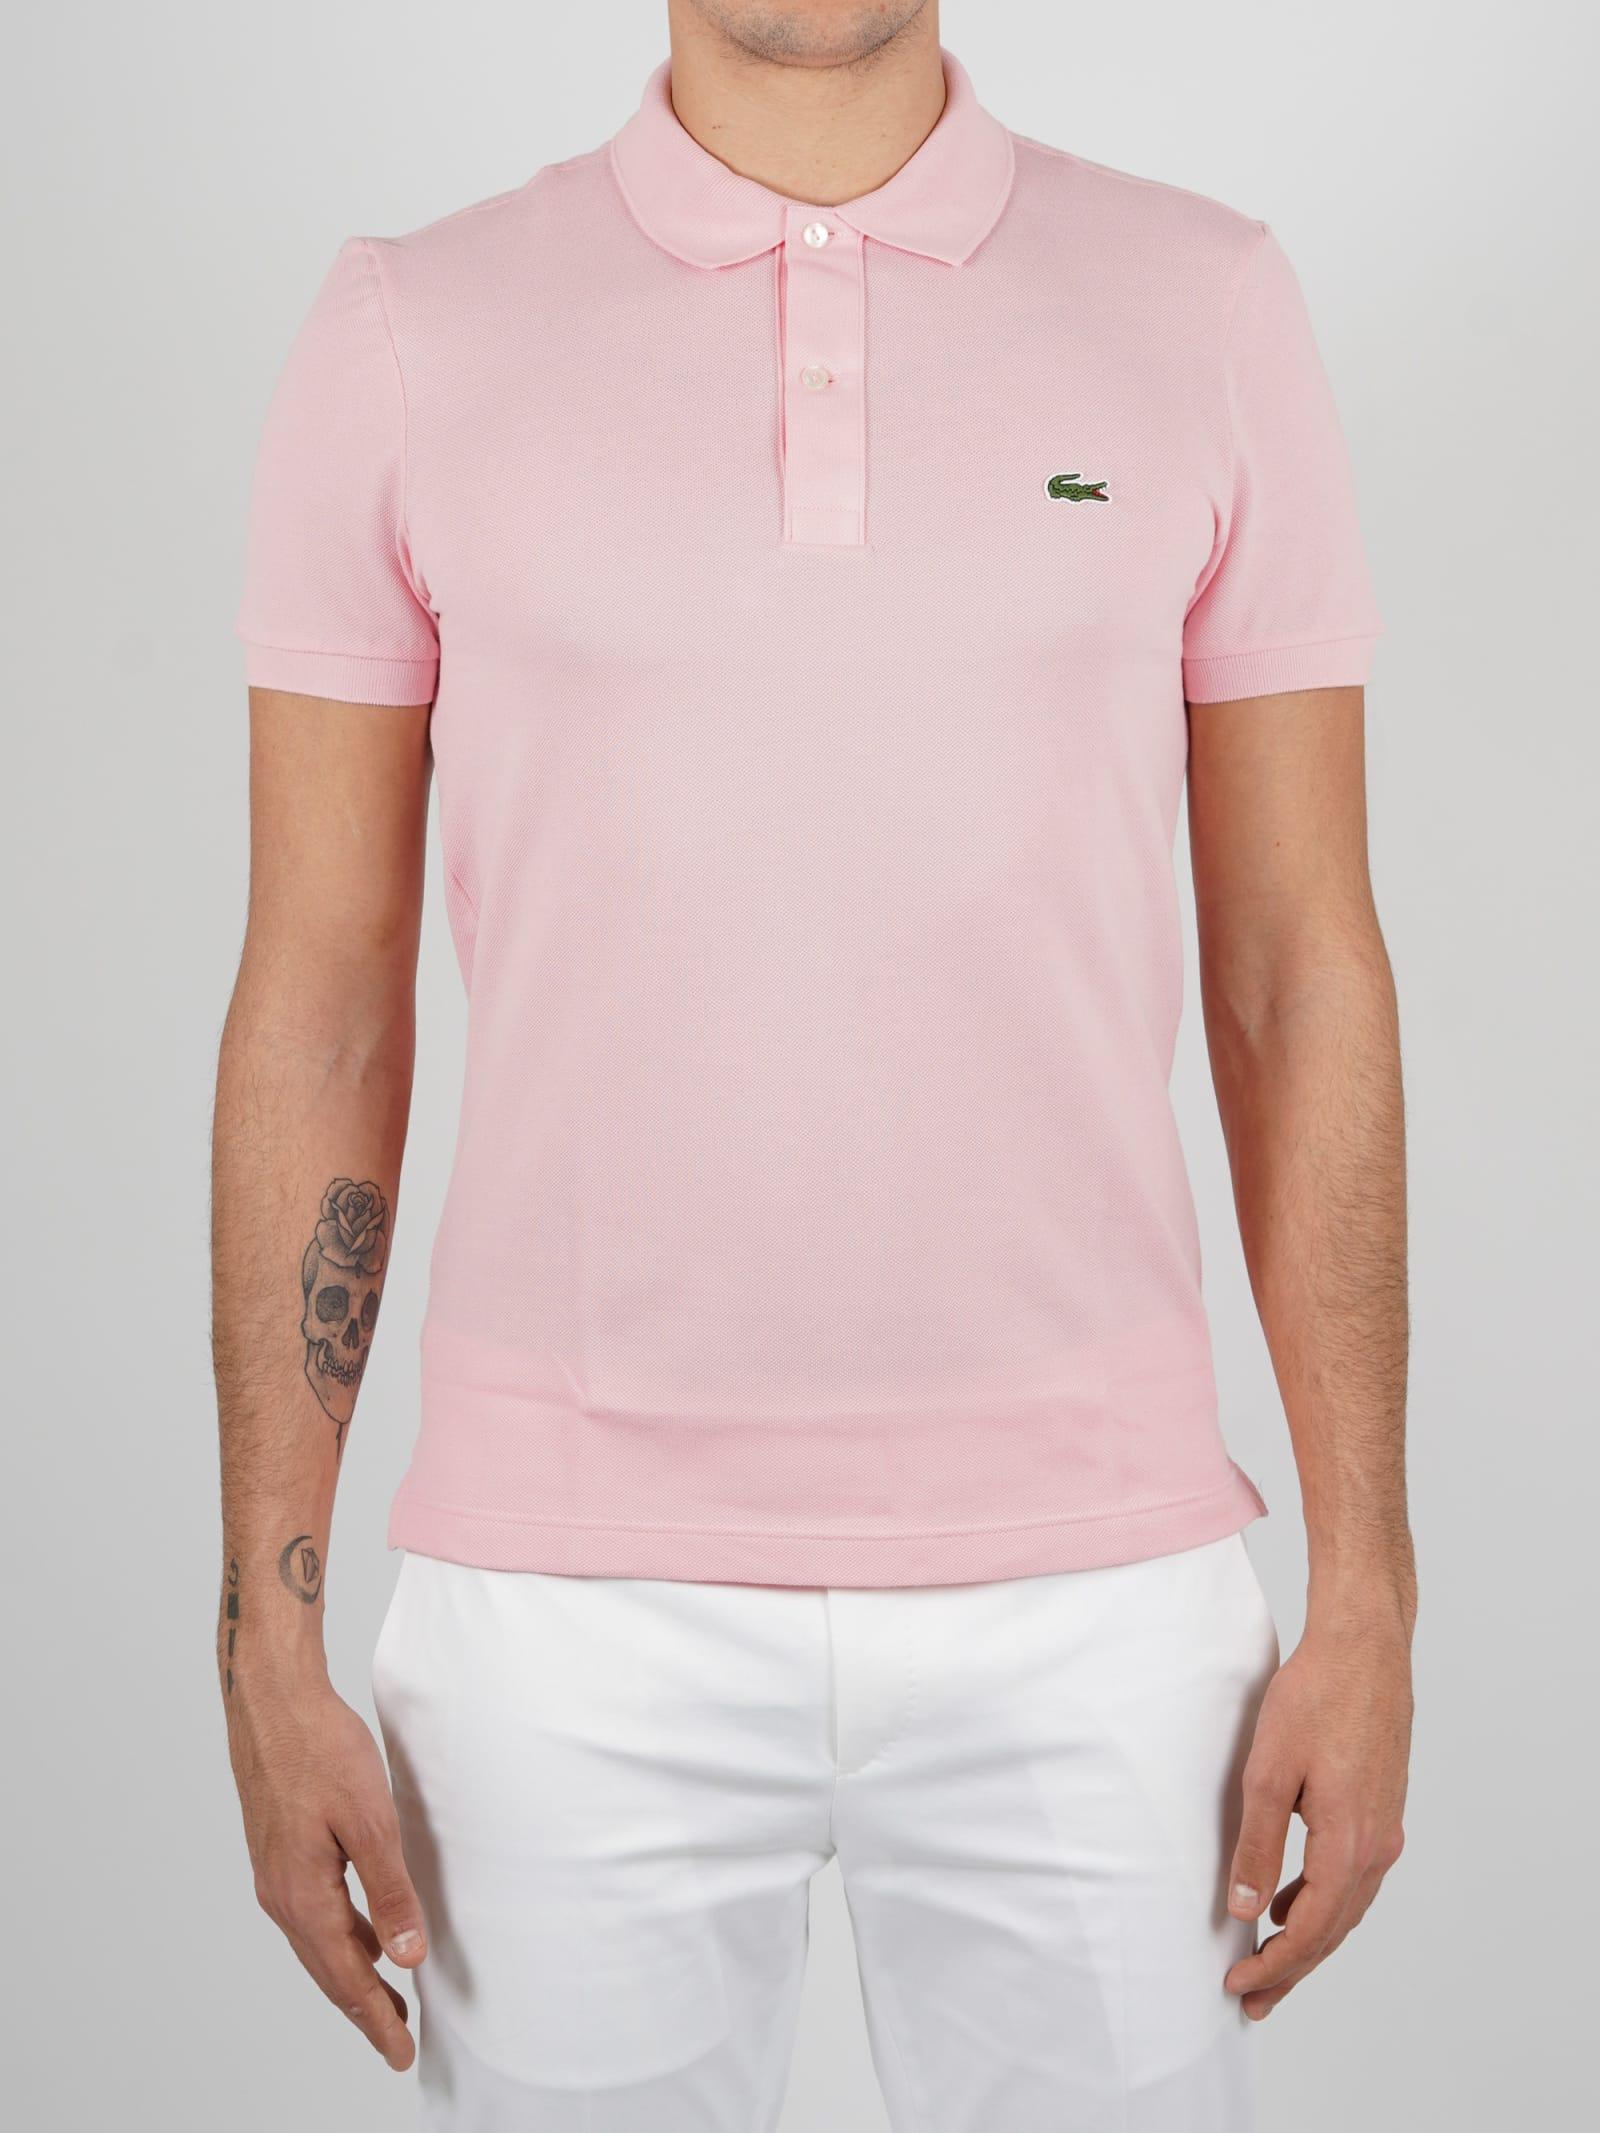 Lacoste Other Materials Polo Shirt in Pink for Men - Save 14% - Lyst